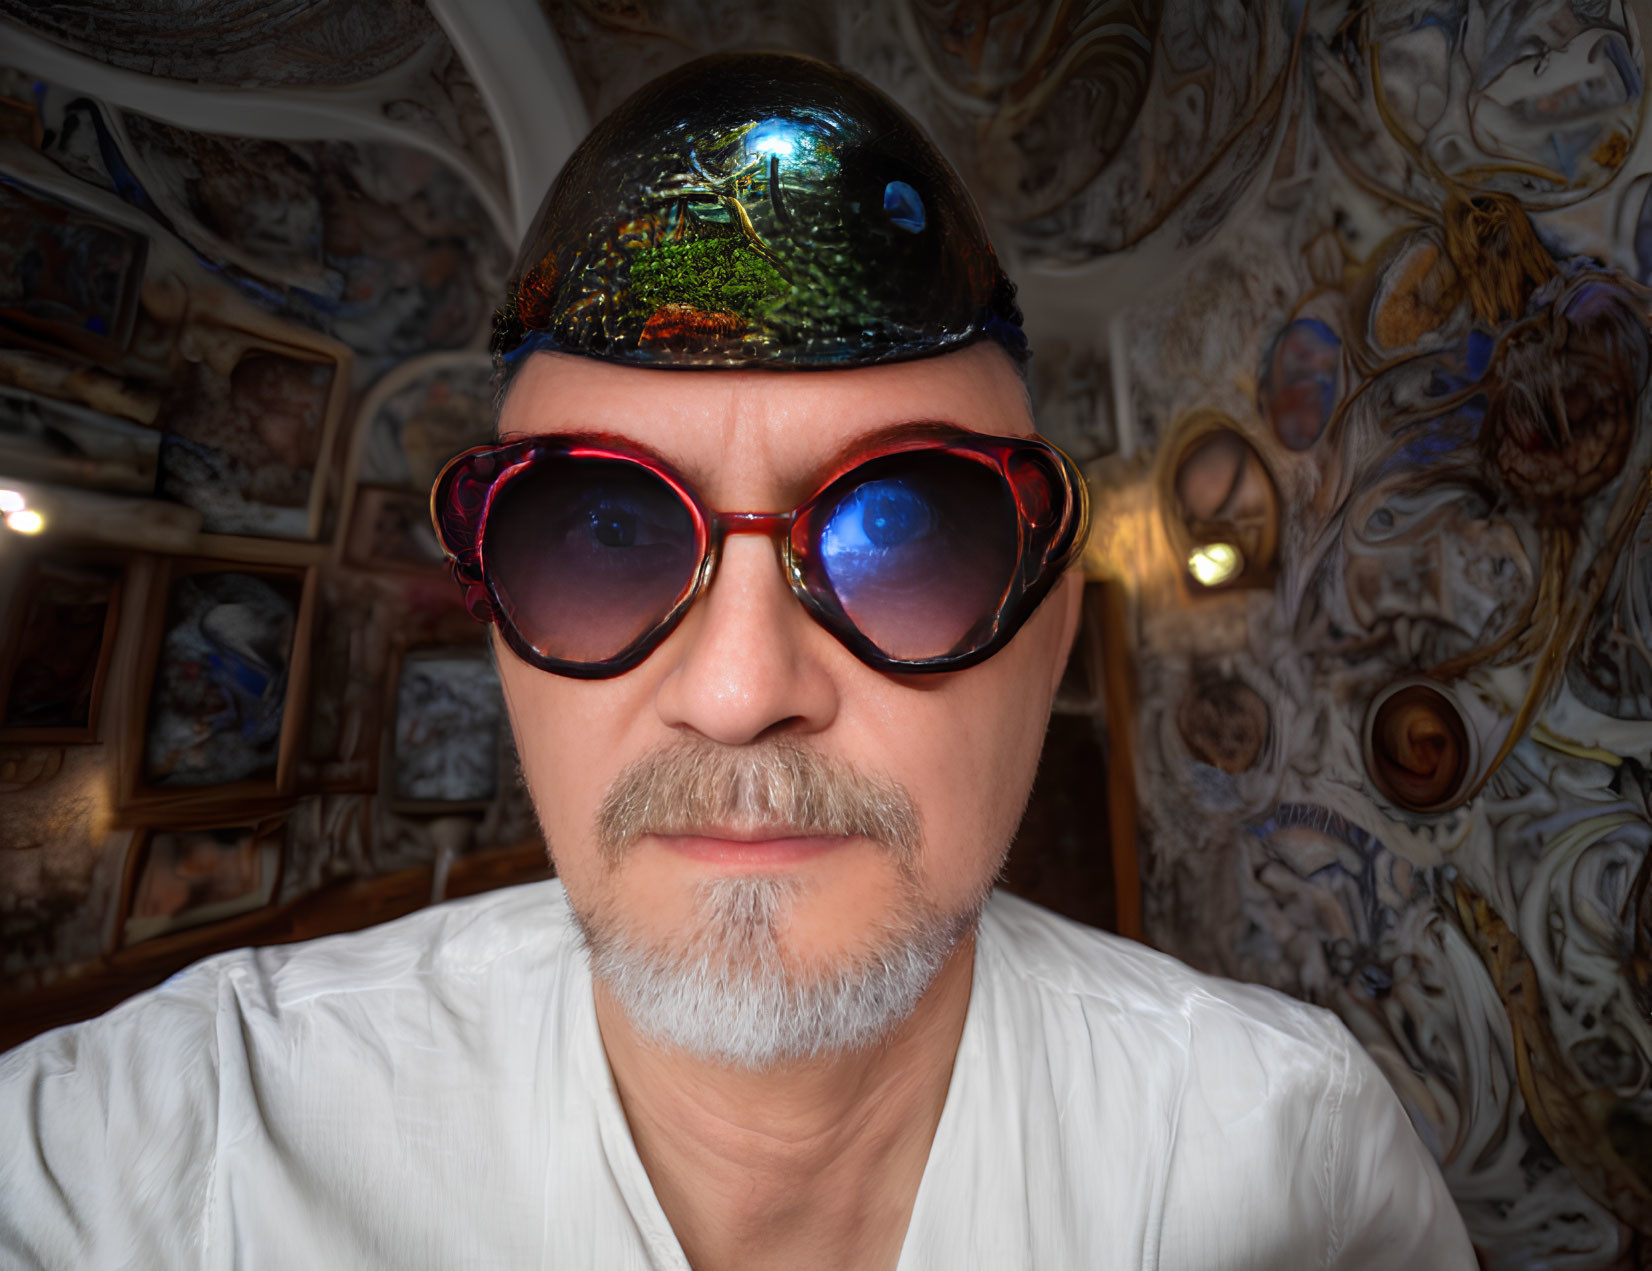 Man with Mustache in Reflective Dome Hat and Red Sunglasses Against Wall Patterns